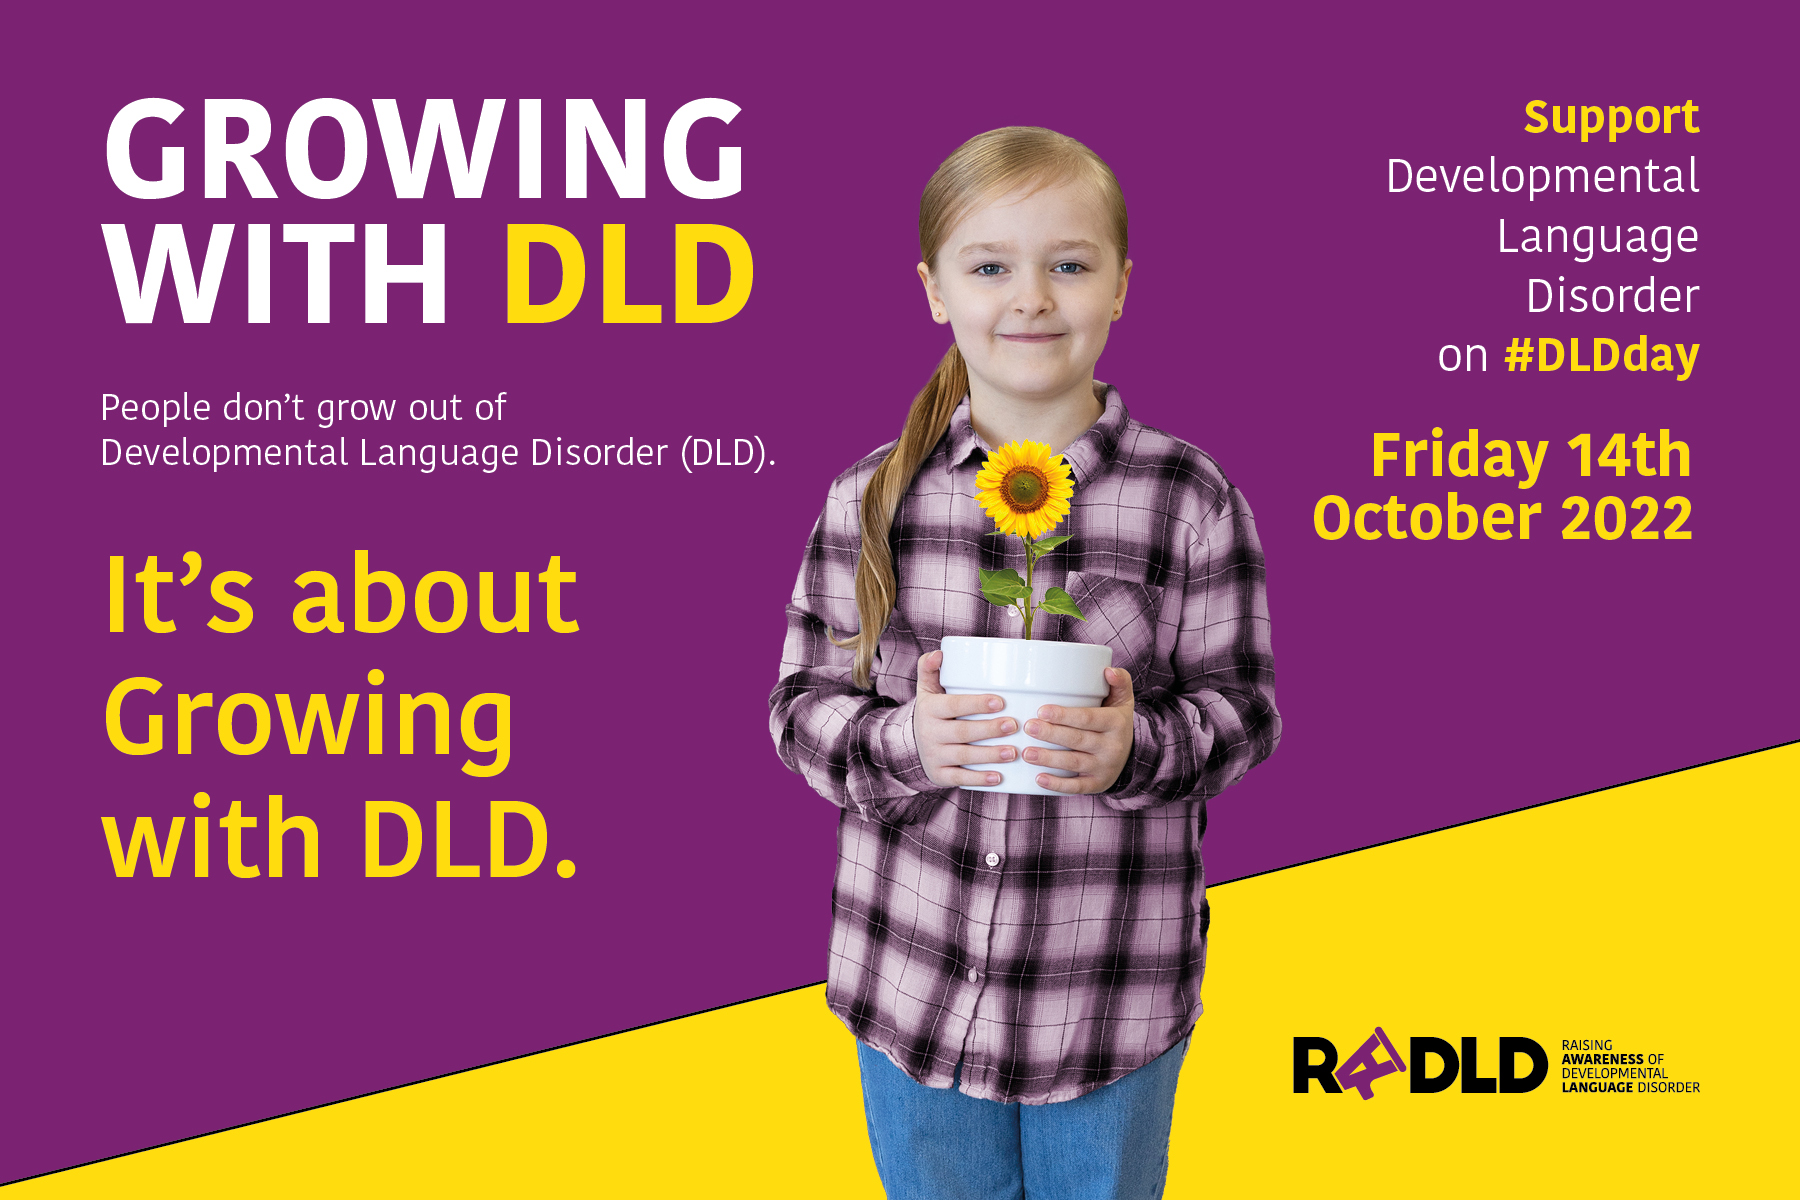 SL Multimedia will be hosting a Coffee Morning to raise awareness of Developmental Language Disorder (DLD) for international #DLDday on Friday 14th October 2022